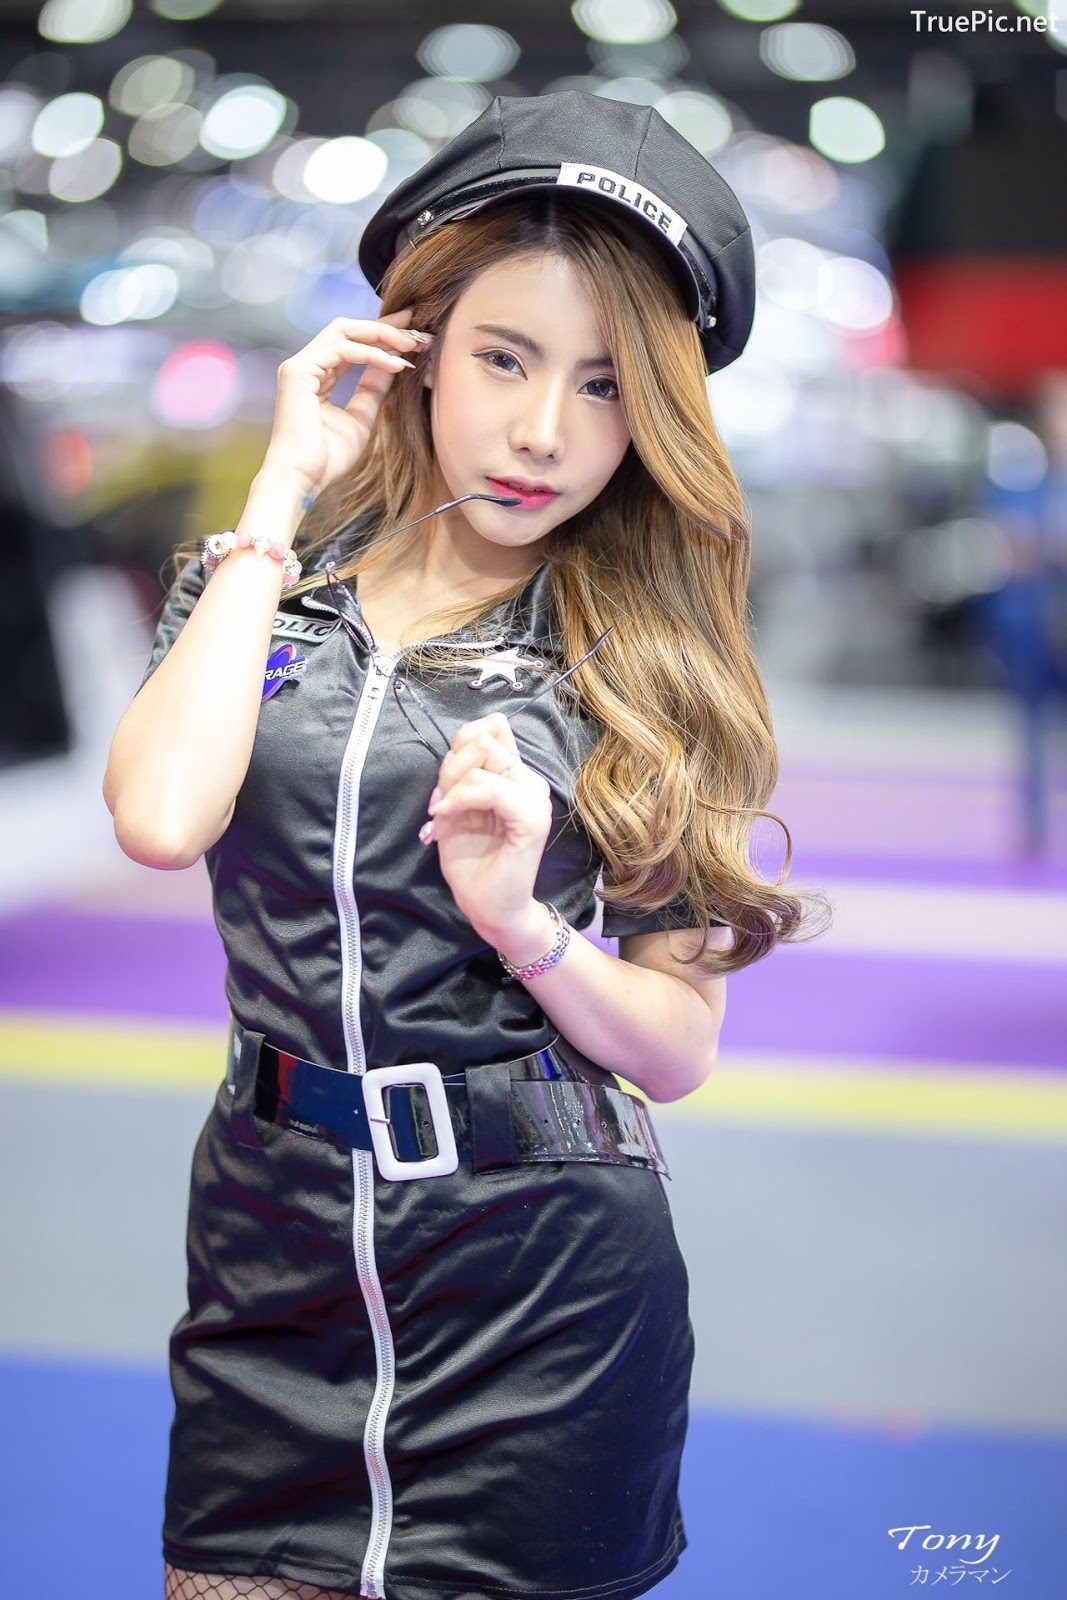 Image-Thailand-Hot-Model-Thai-Racing-Girl-At-Motor-Expo-2019-TruePic.net- Picture-117